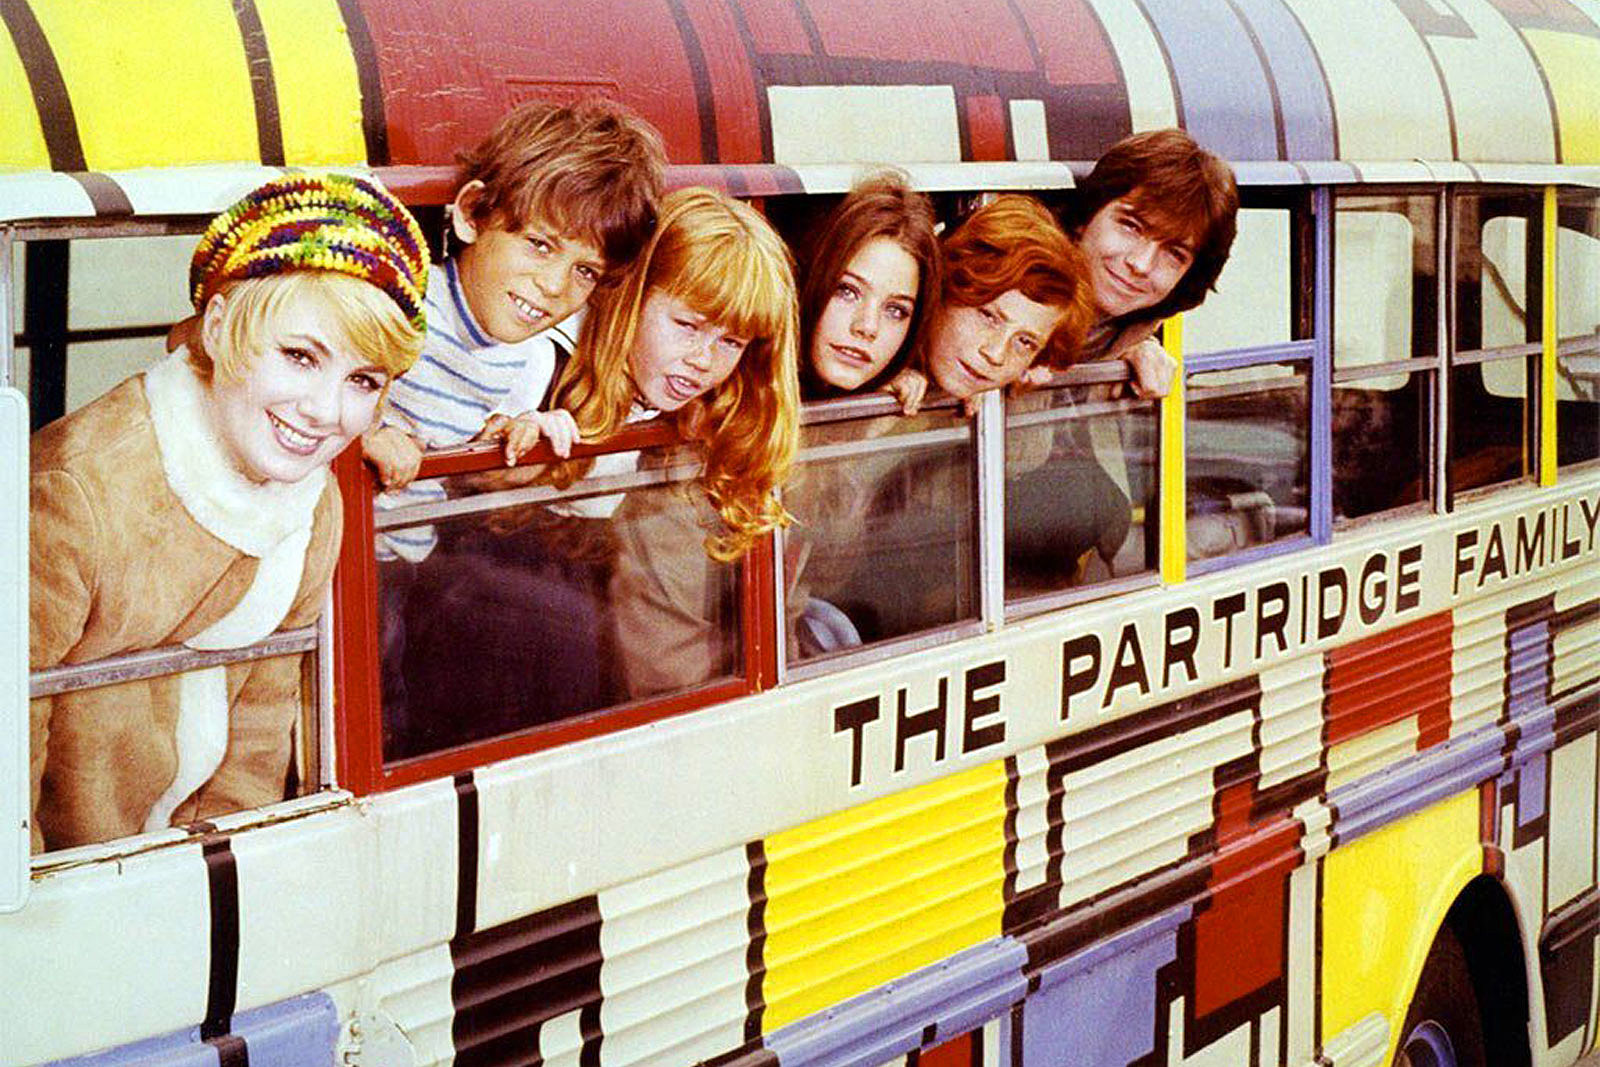 Musical family sitcom "The Partridge Family" starring Shi...